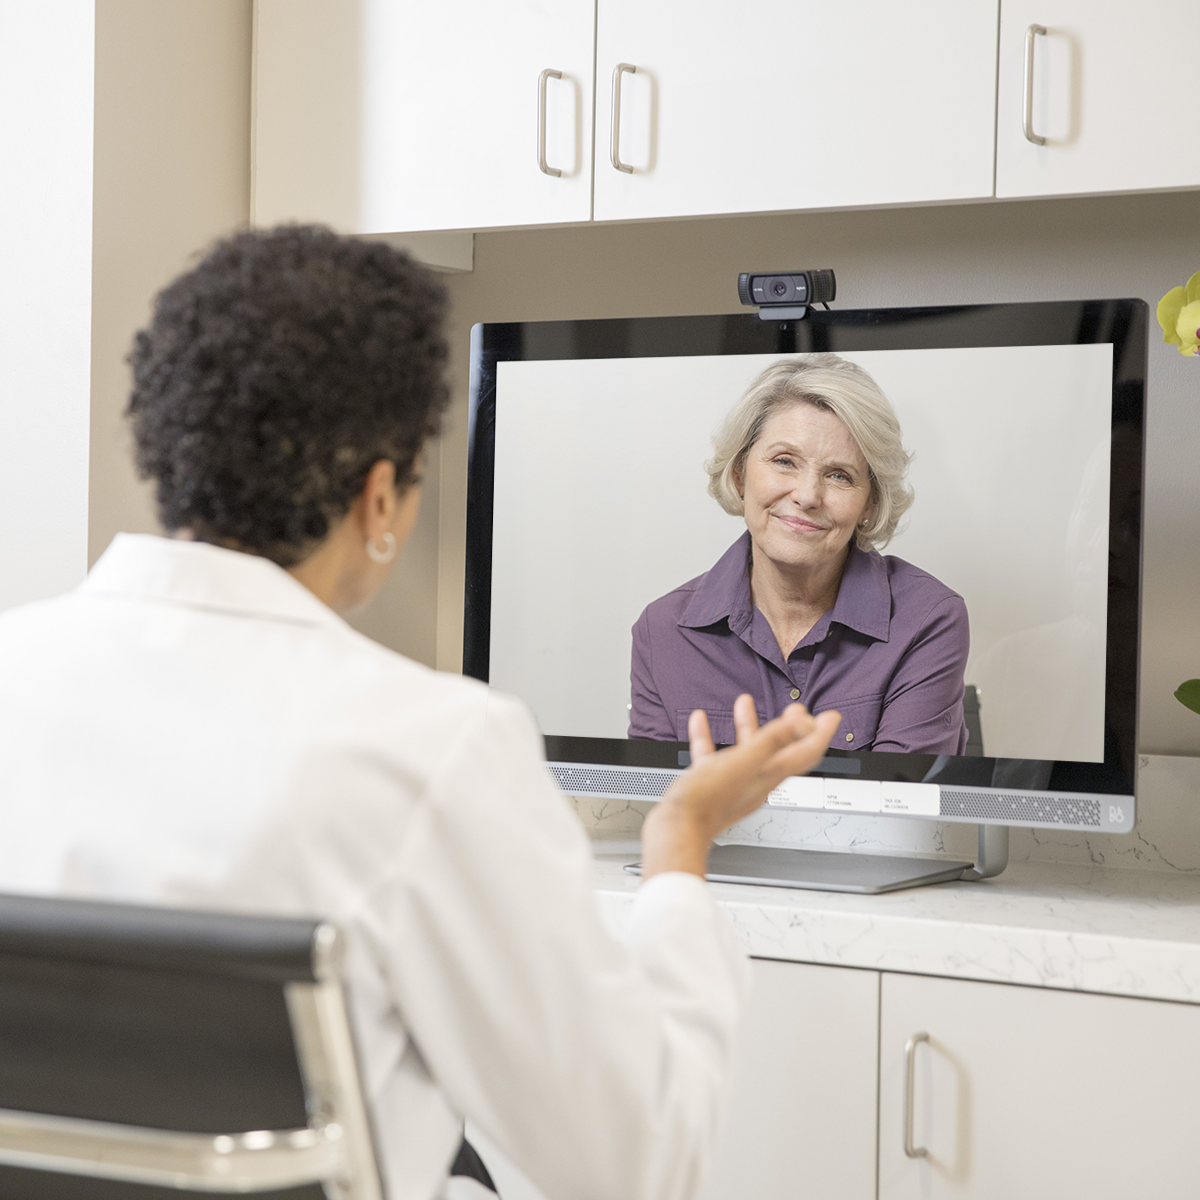 Physician providing healthcare to a patient through telehealth video session